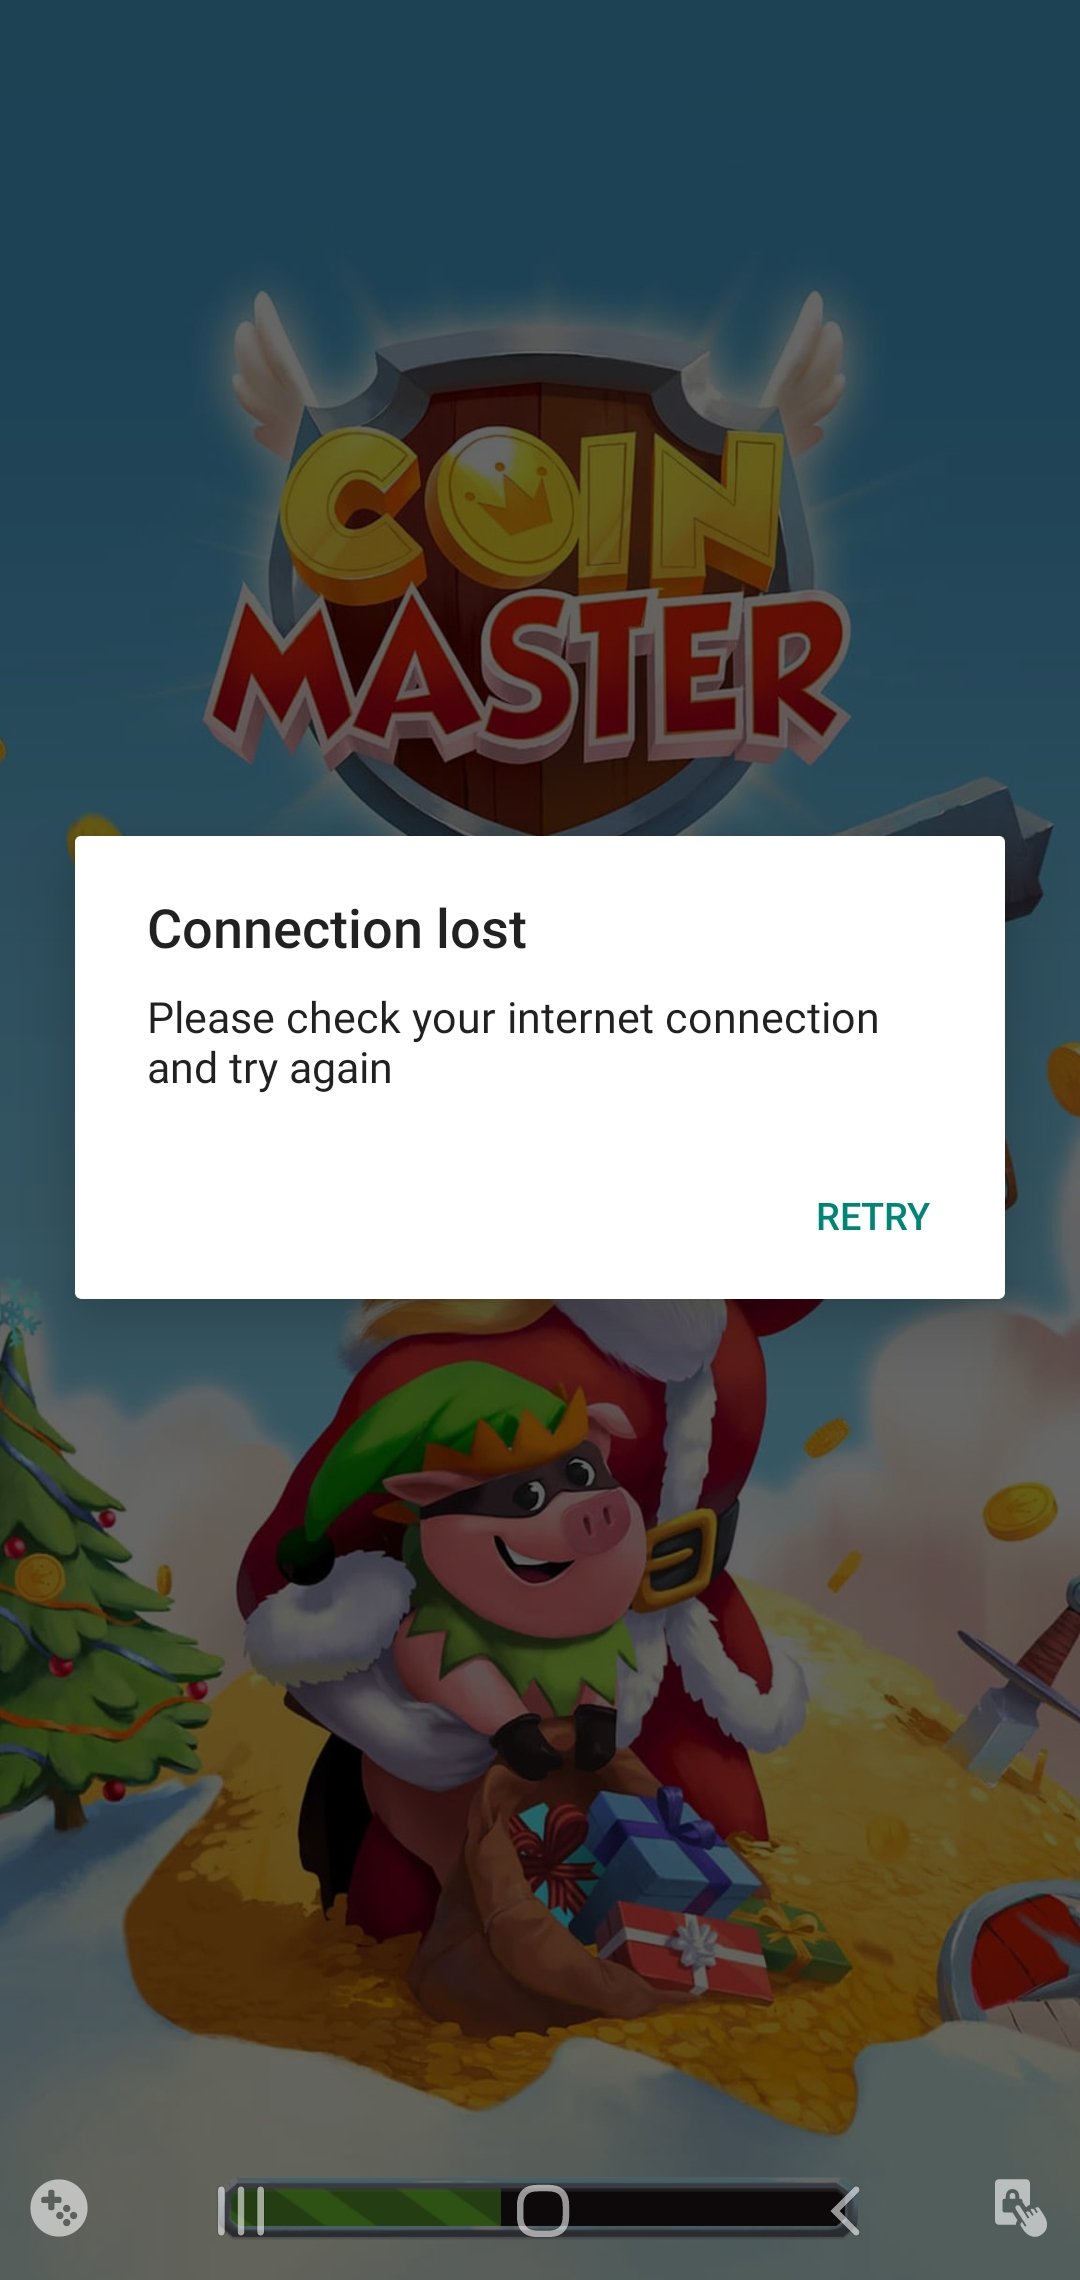 Coin Master complaint during a game it started saying no connection for two hours